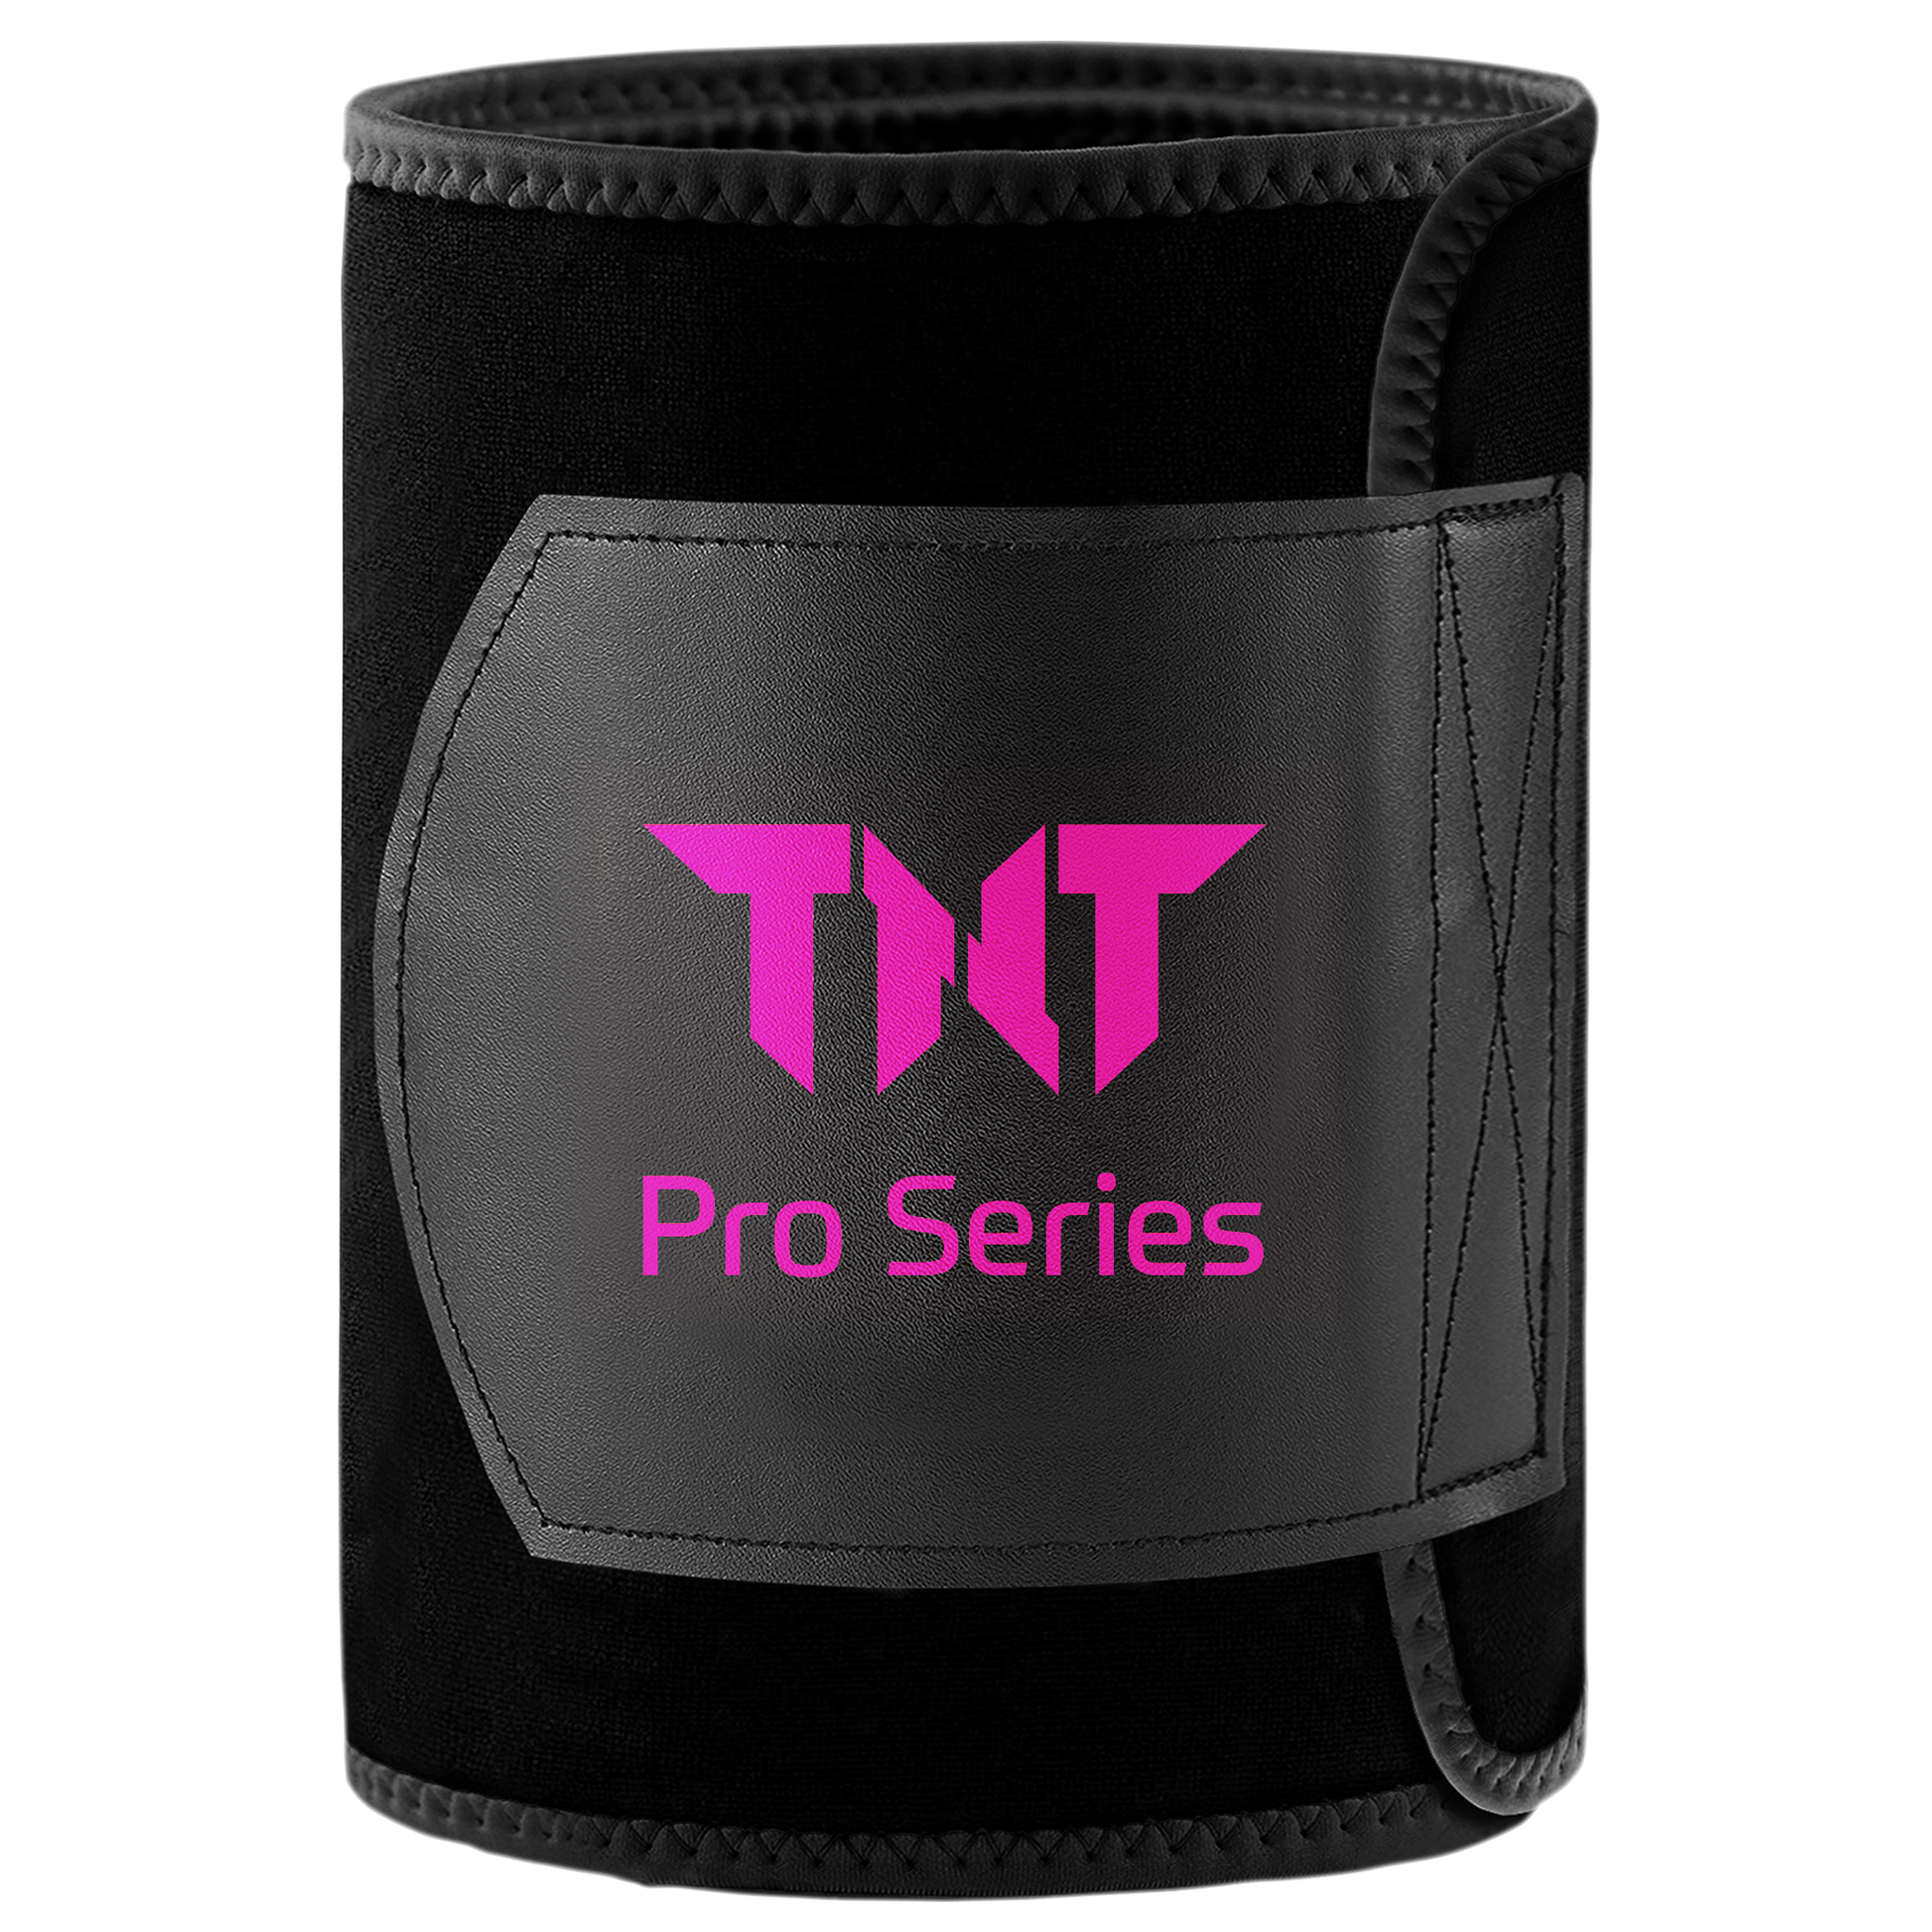 Upper Arm & Thigh Slimmer Kit by TNT Pro Series